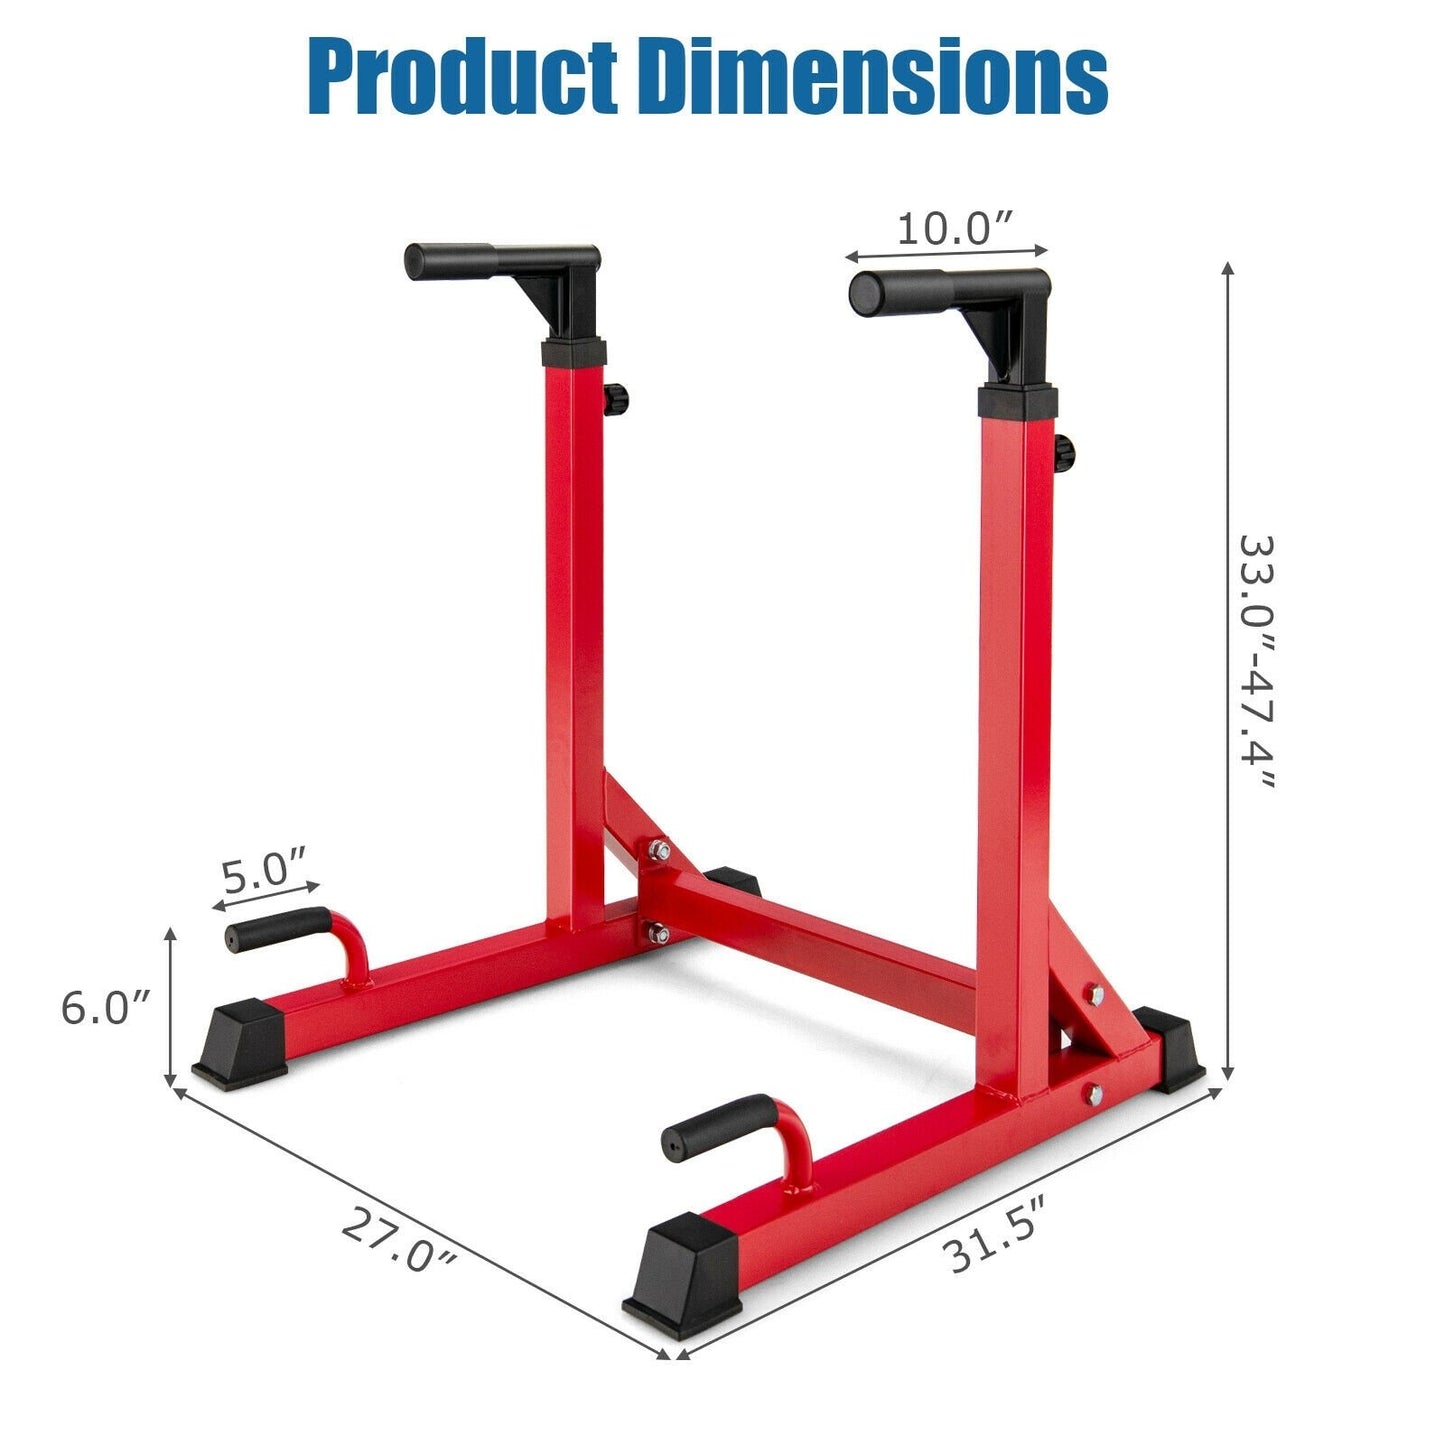 Adjustable Multi-function Dip-up Station for Power Training, Red